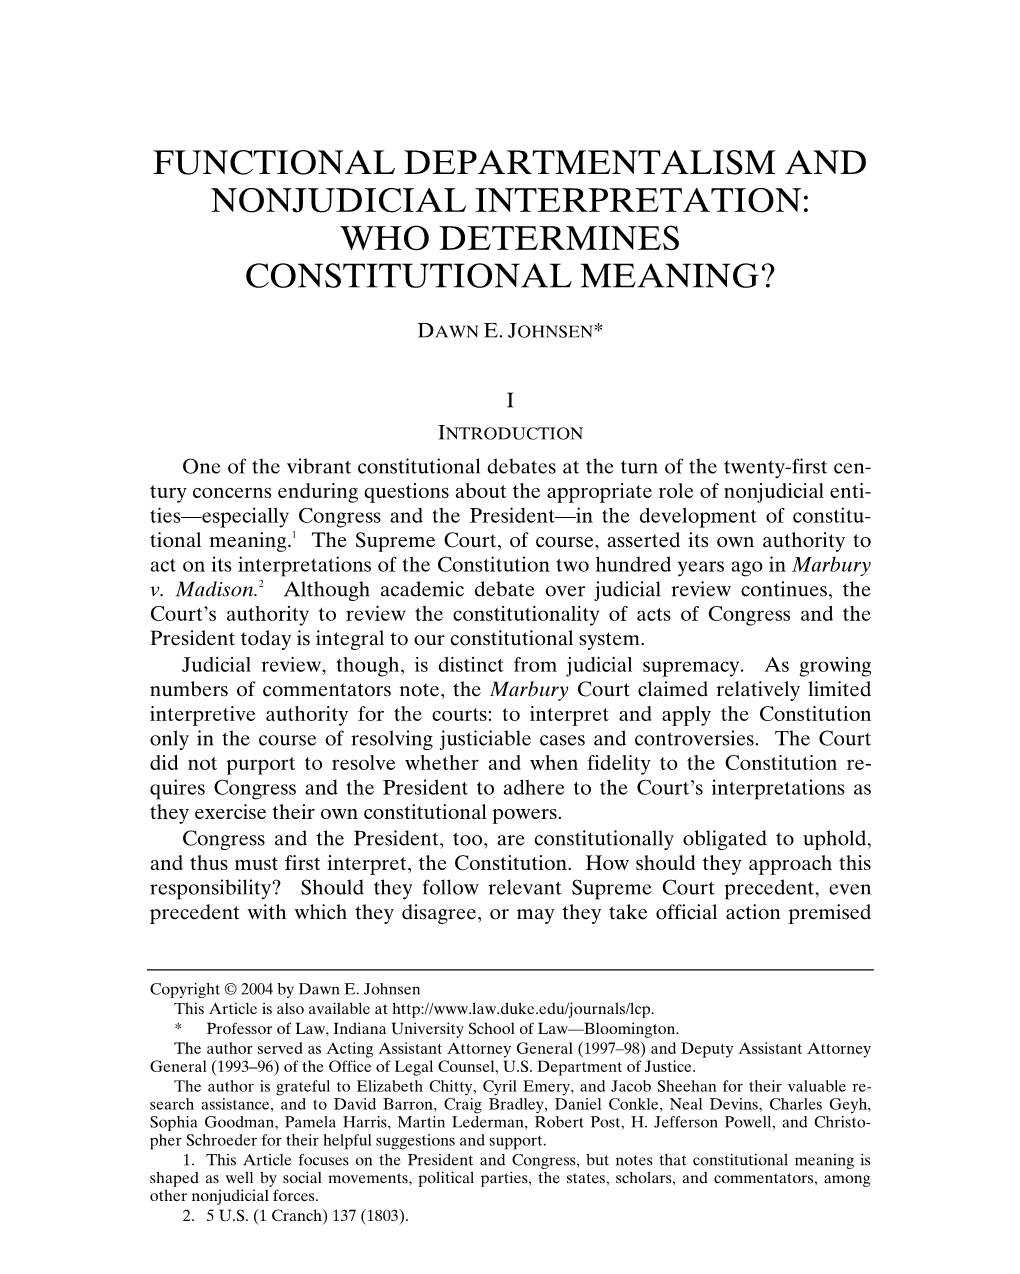 Functional Departmentalism and Nonjudicial Interpretation: Who Determines Constitutional Meaning?